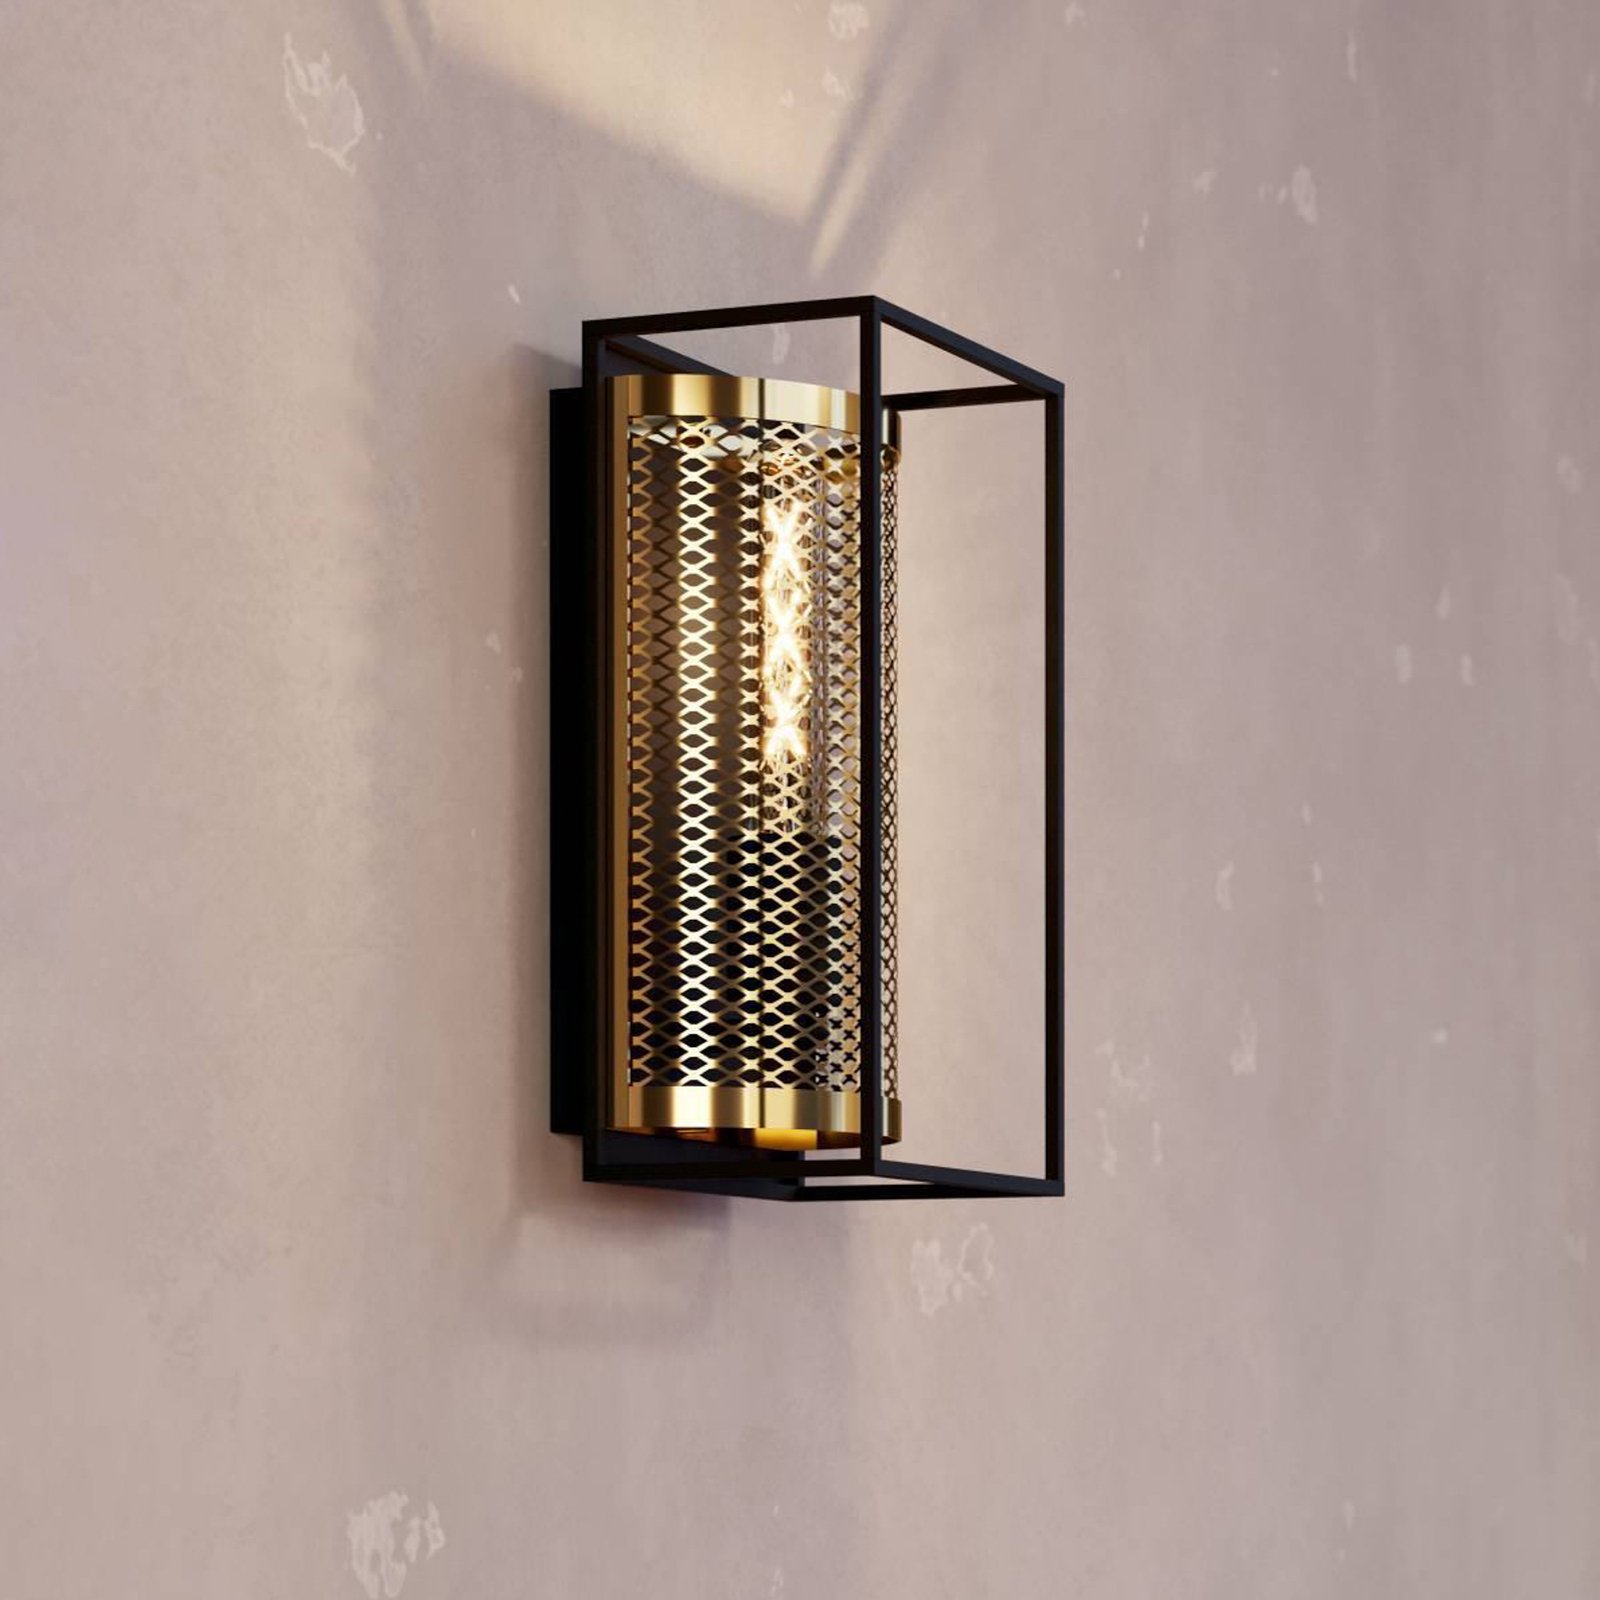 Nohales wall light, height 32 cm, black/brass-coloured